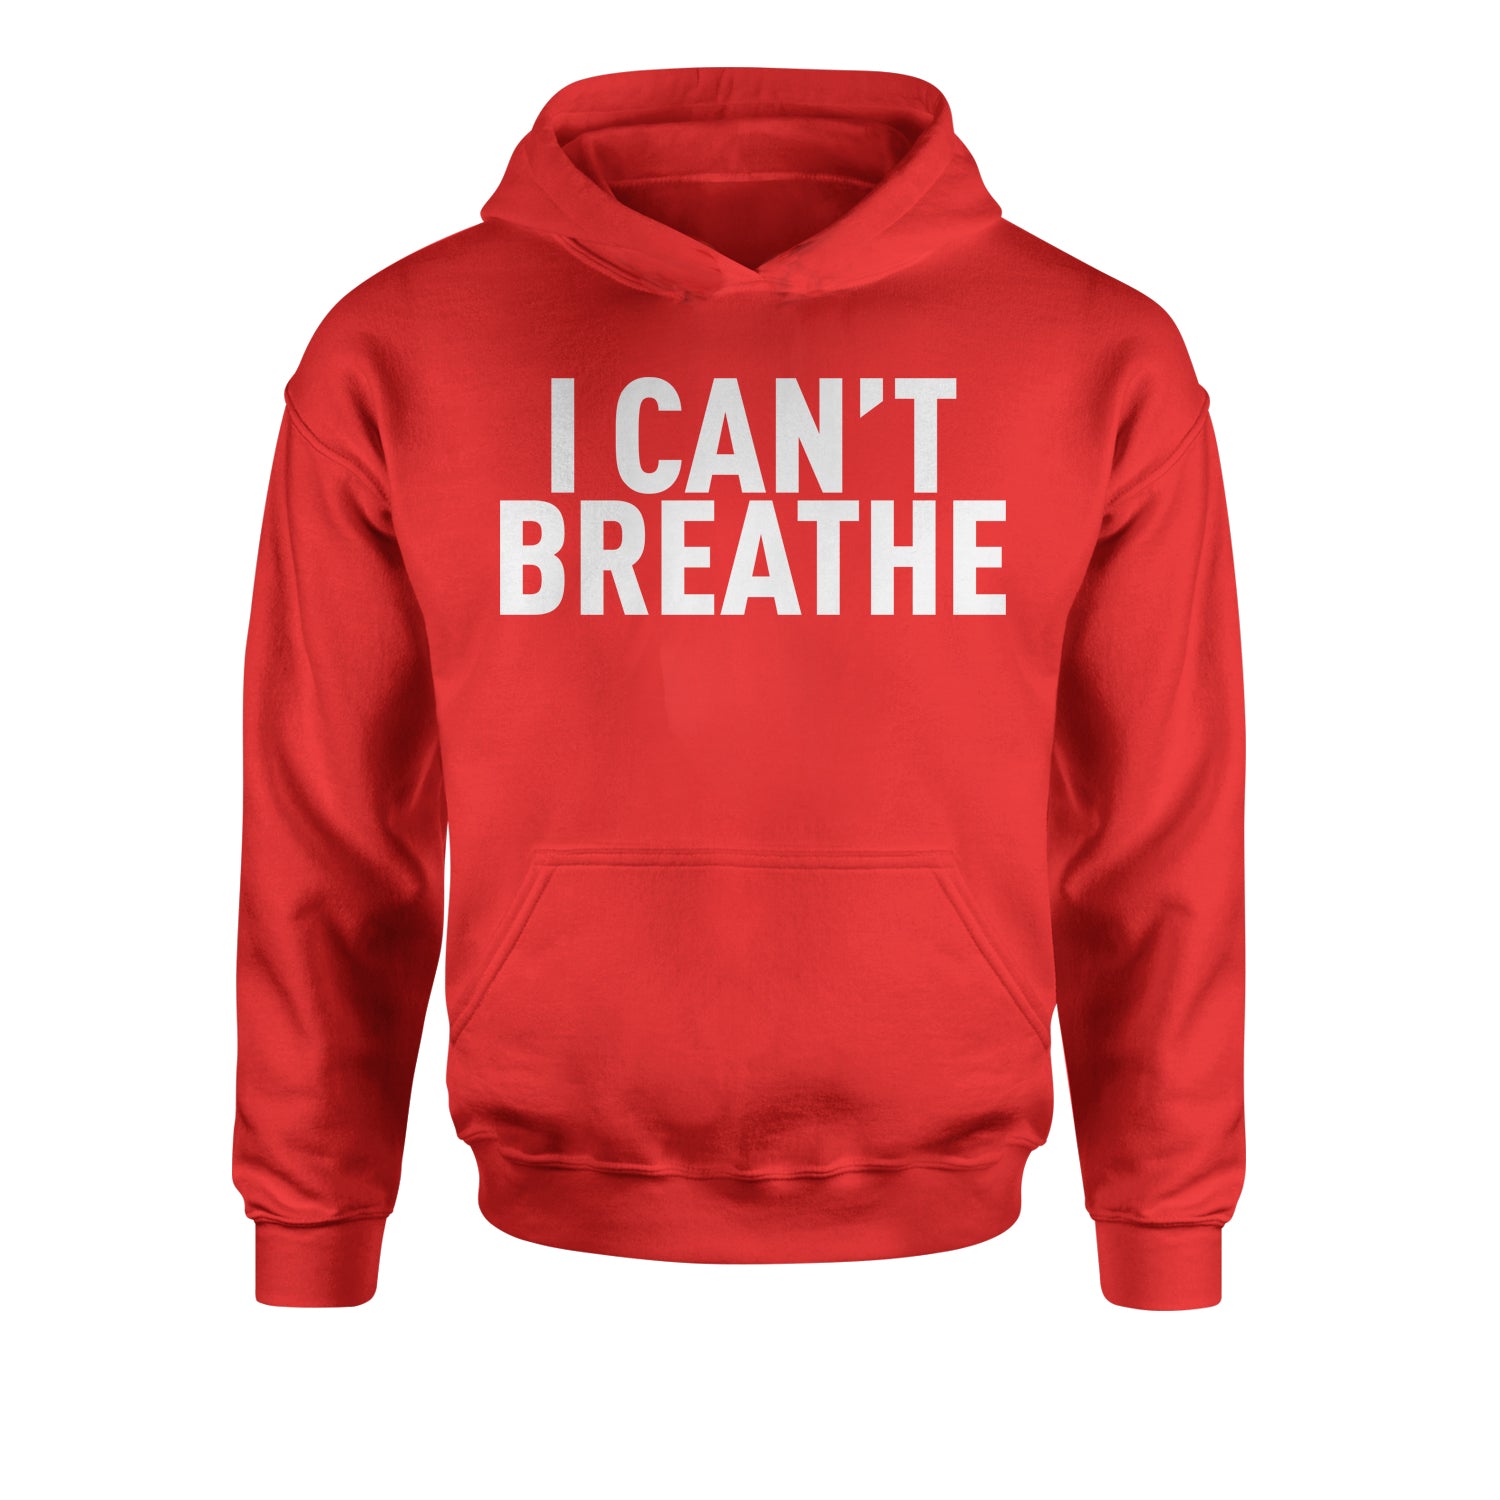 I Can't Breathe Social Justice Youth-Sized Hoodie african, africanamerican, american, black, blm, breonna, floyd, george, life, lives, matter, taylor by Expression Tees